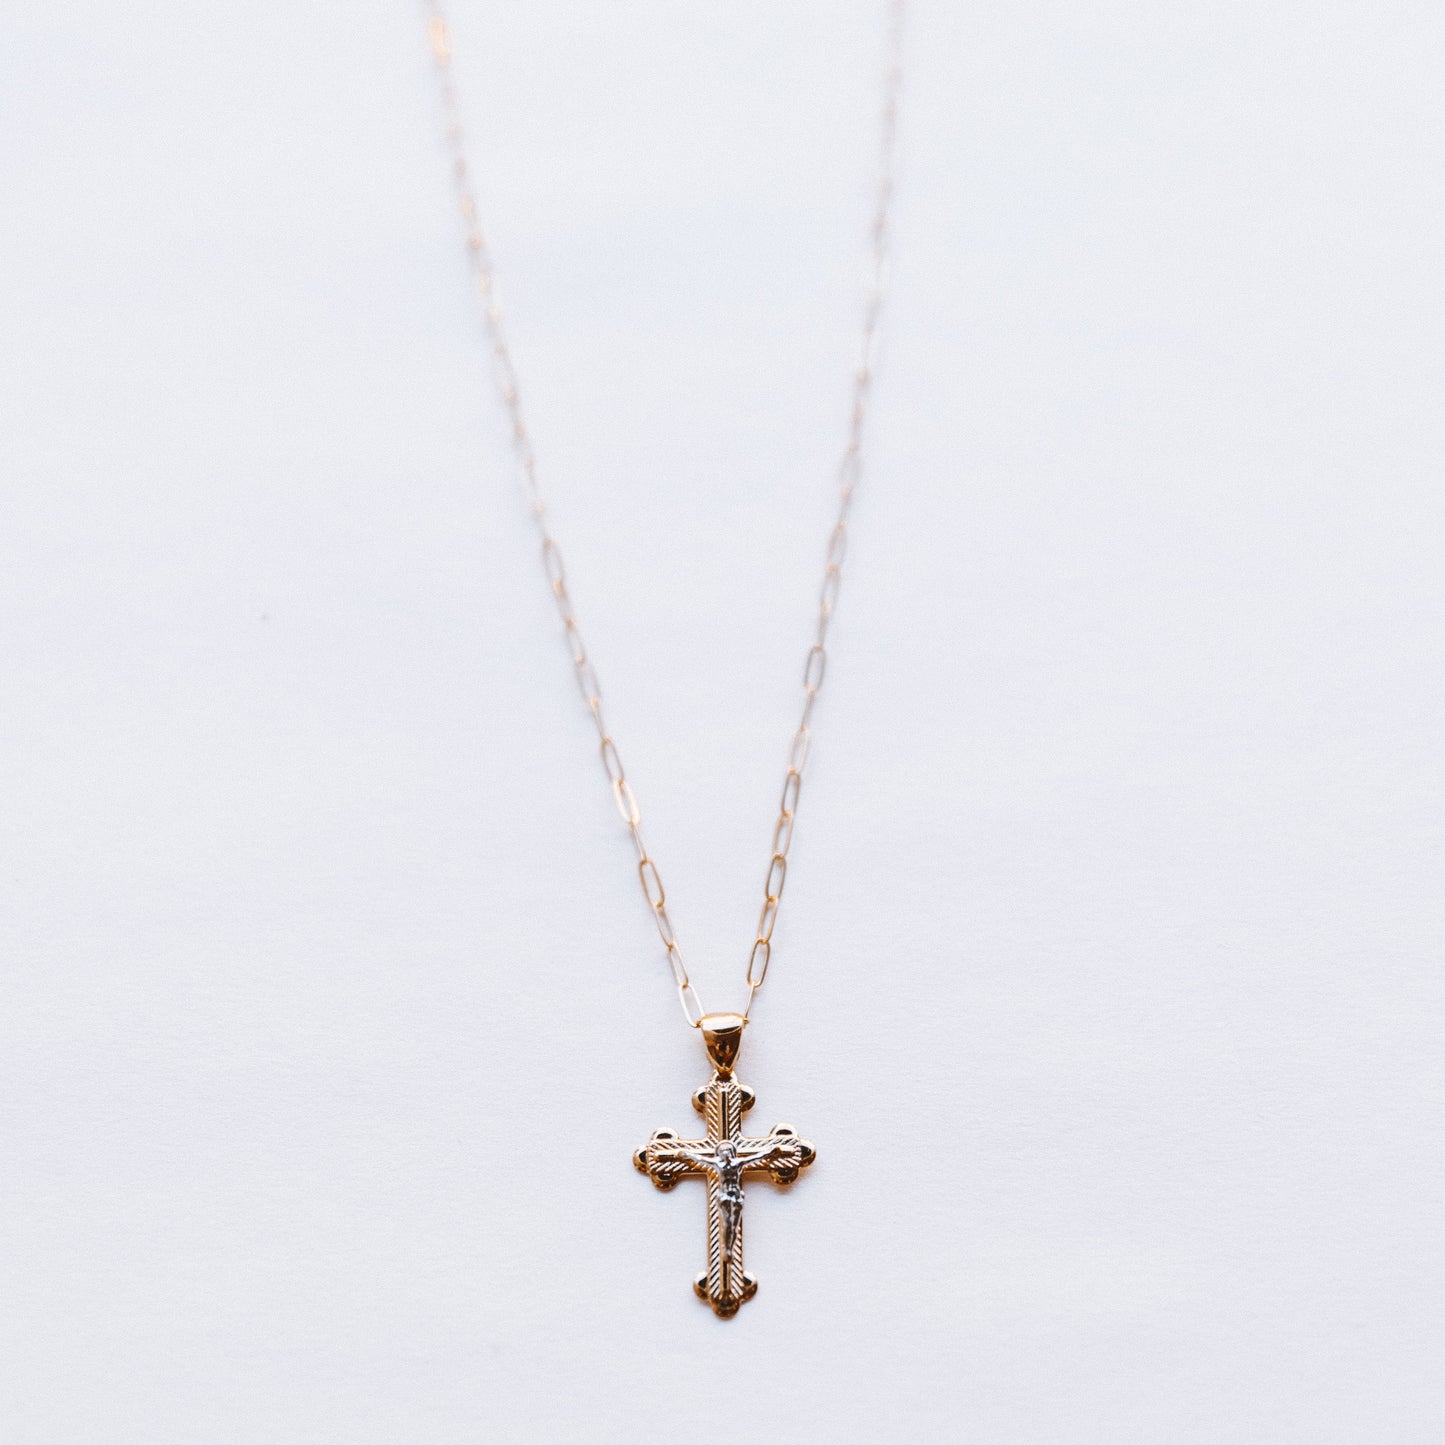 The Mixed Cross Necklace